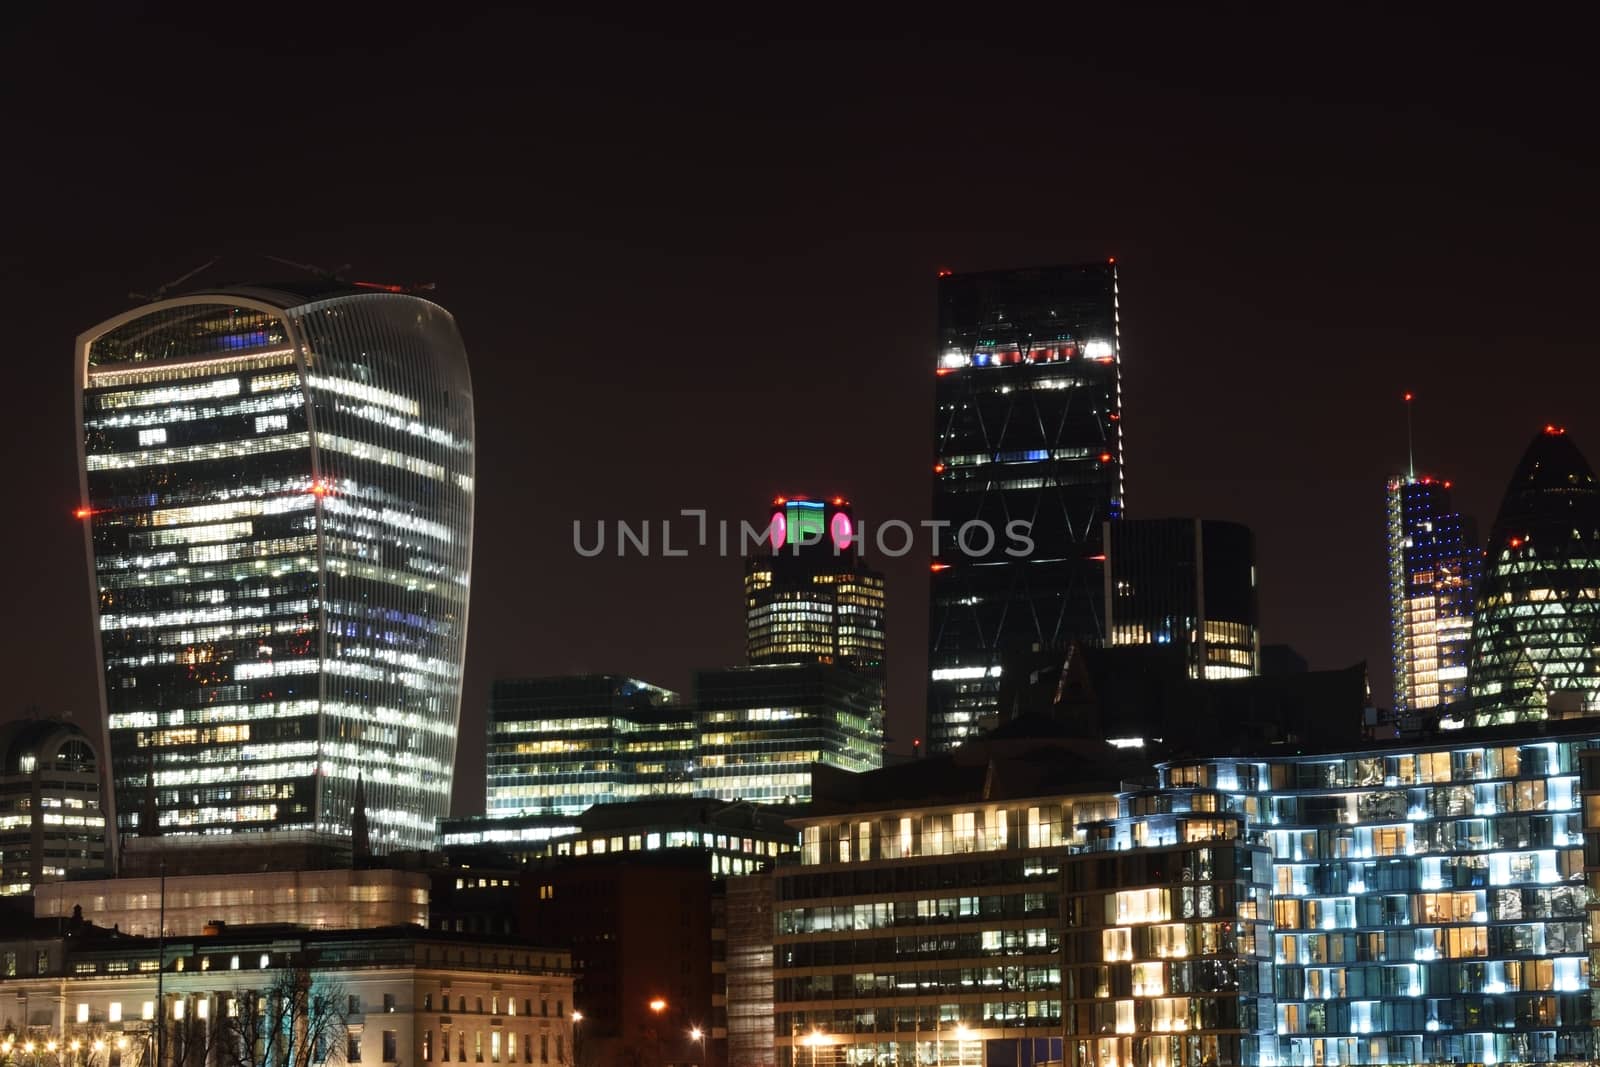 London City Towers at night by pauws99